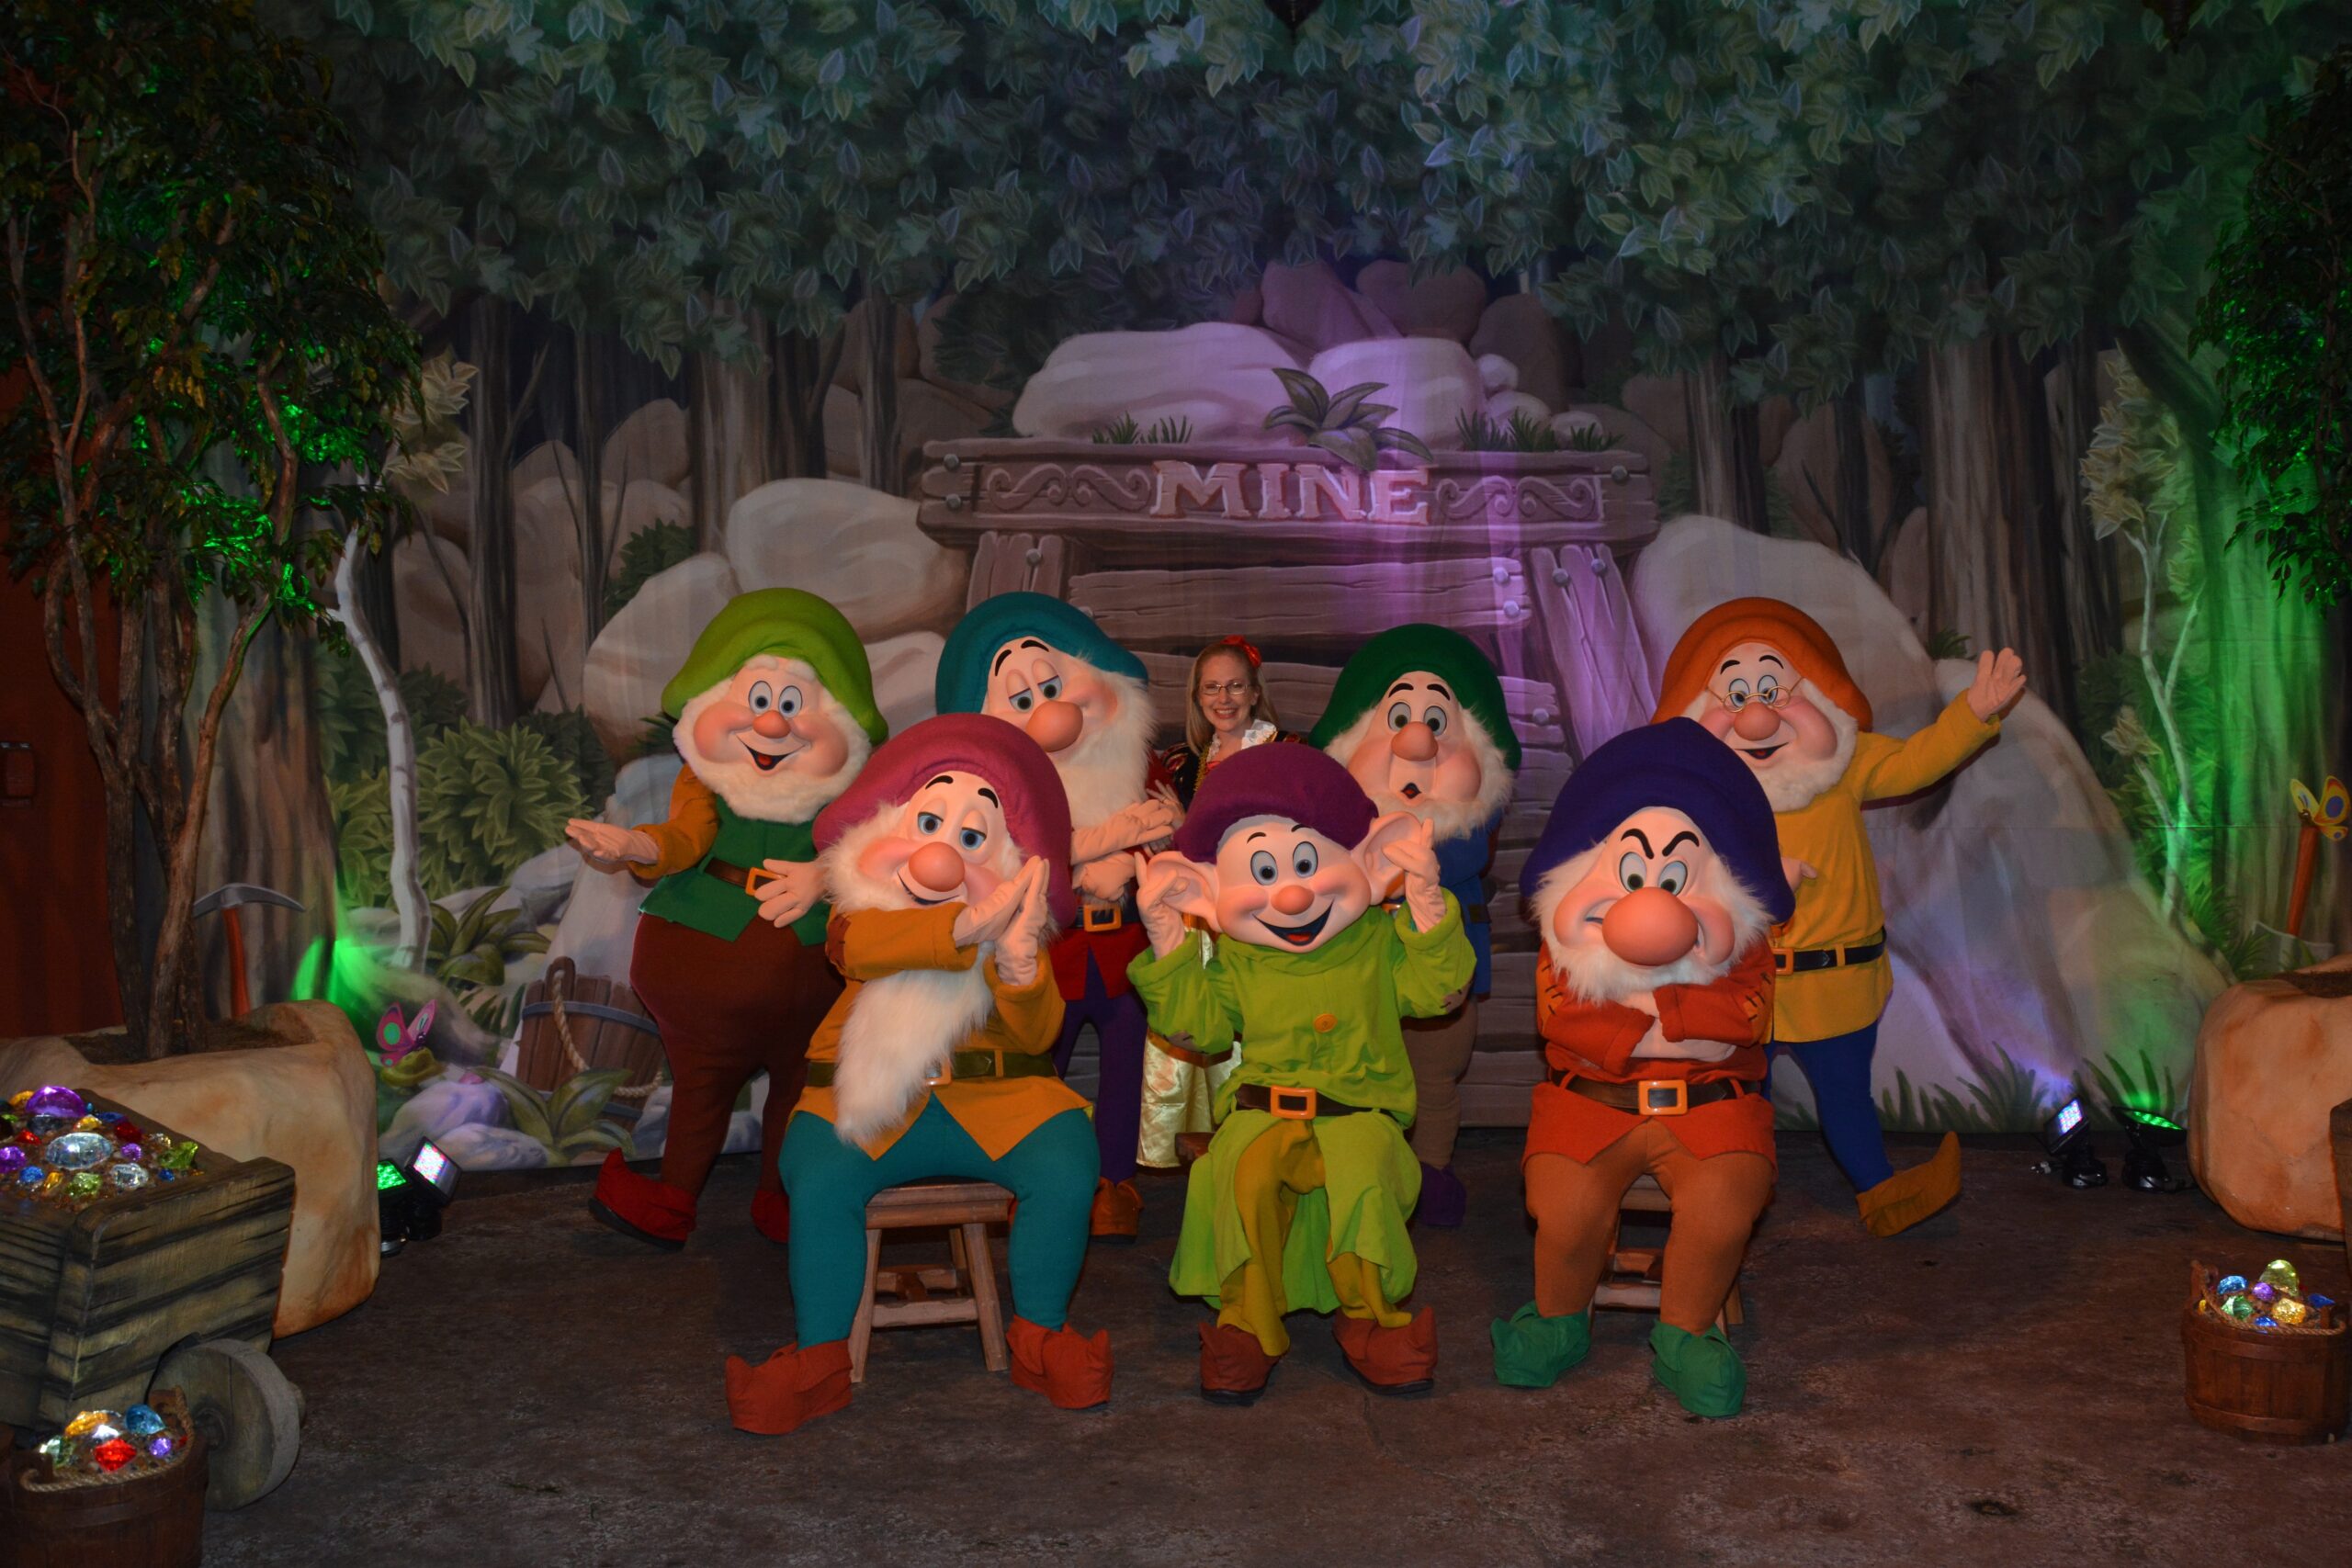 Picture of Seven Dwarfs with guest dressed as Snow with at Mickeys Not So Scary Halloween Party ( MNSSHP ) in a special character photo opportunity only available during the party